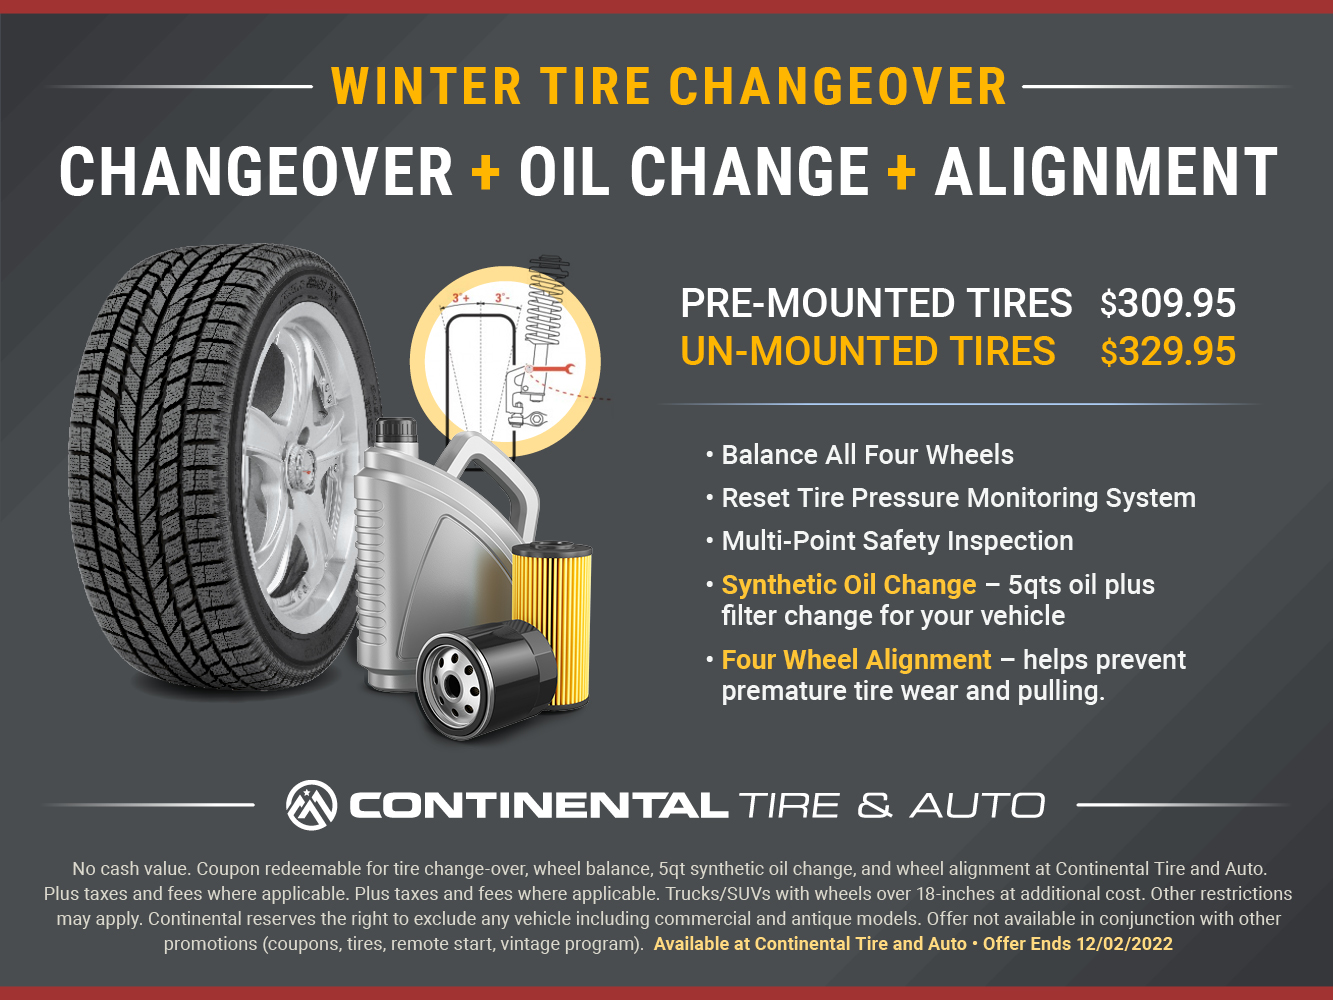 2022 Winter Tire Changeover + Synthetic Oil Change + Alignment